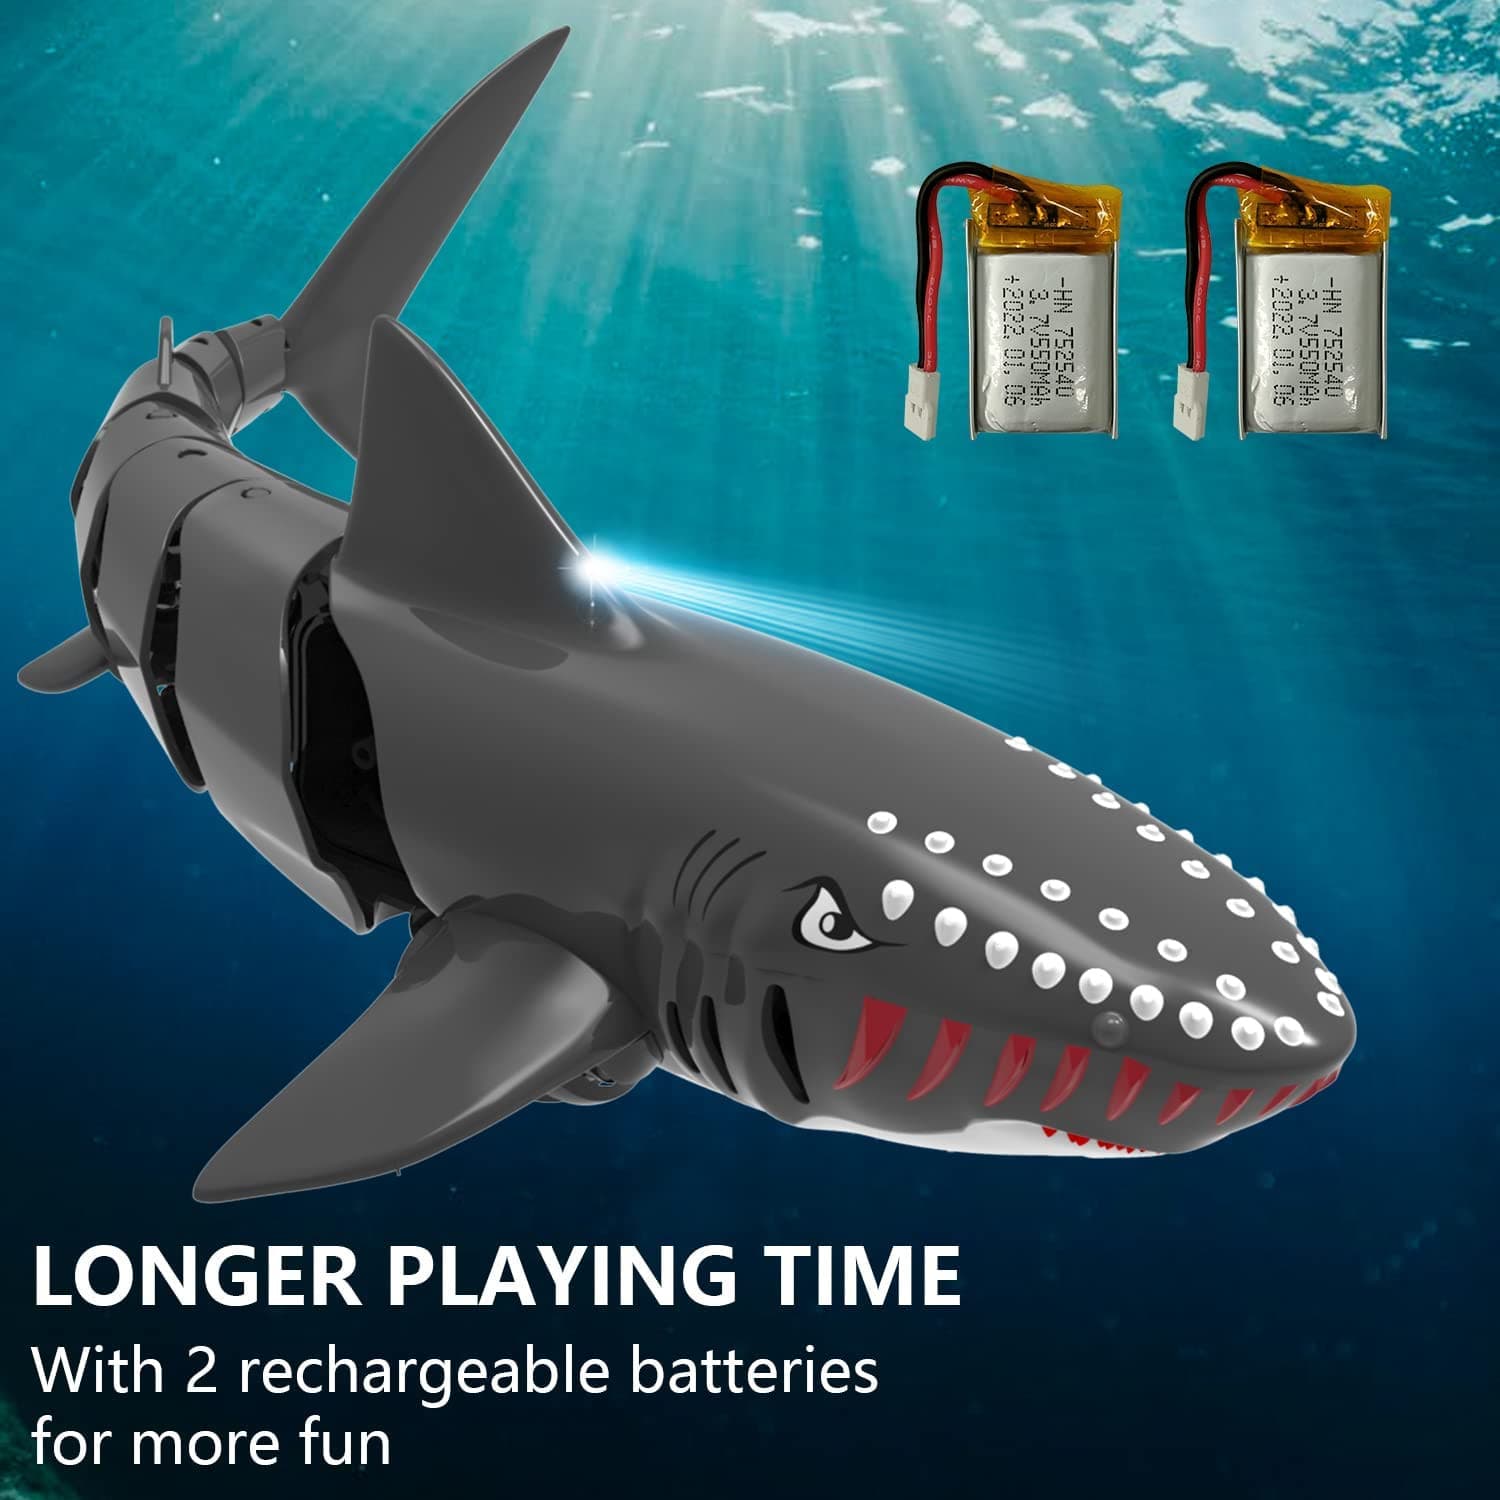 Remote Control Shark Toy 1:18 Scale High Simulation Shark for Kids - EXHOBBY